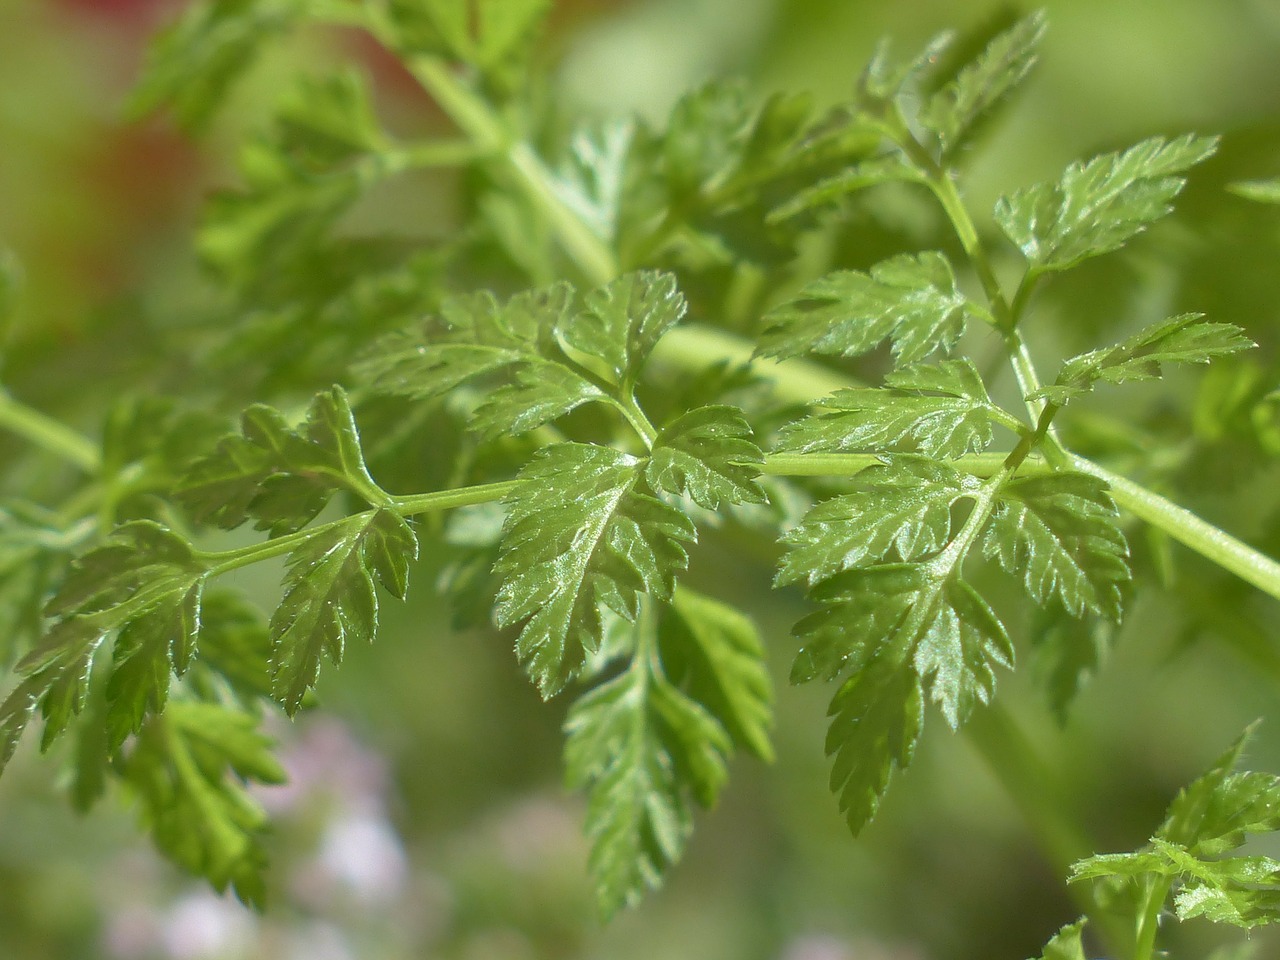 FIND OUT MORE ABOUT CHERVIL